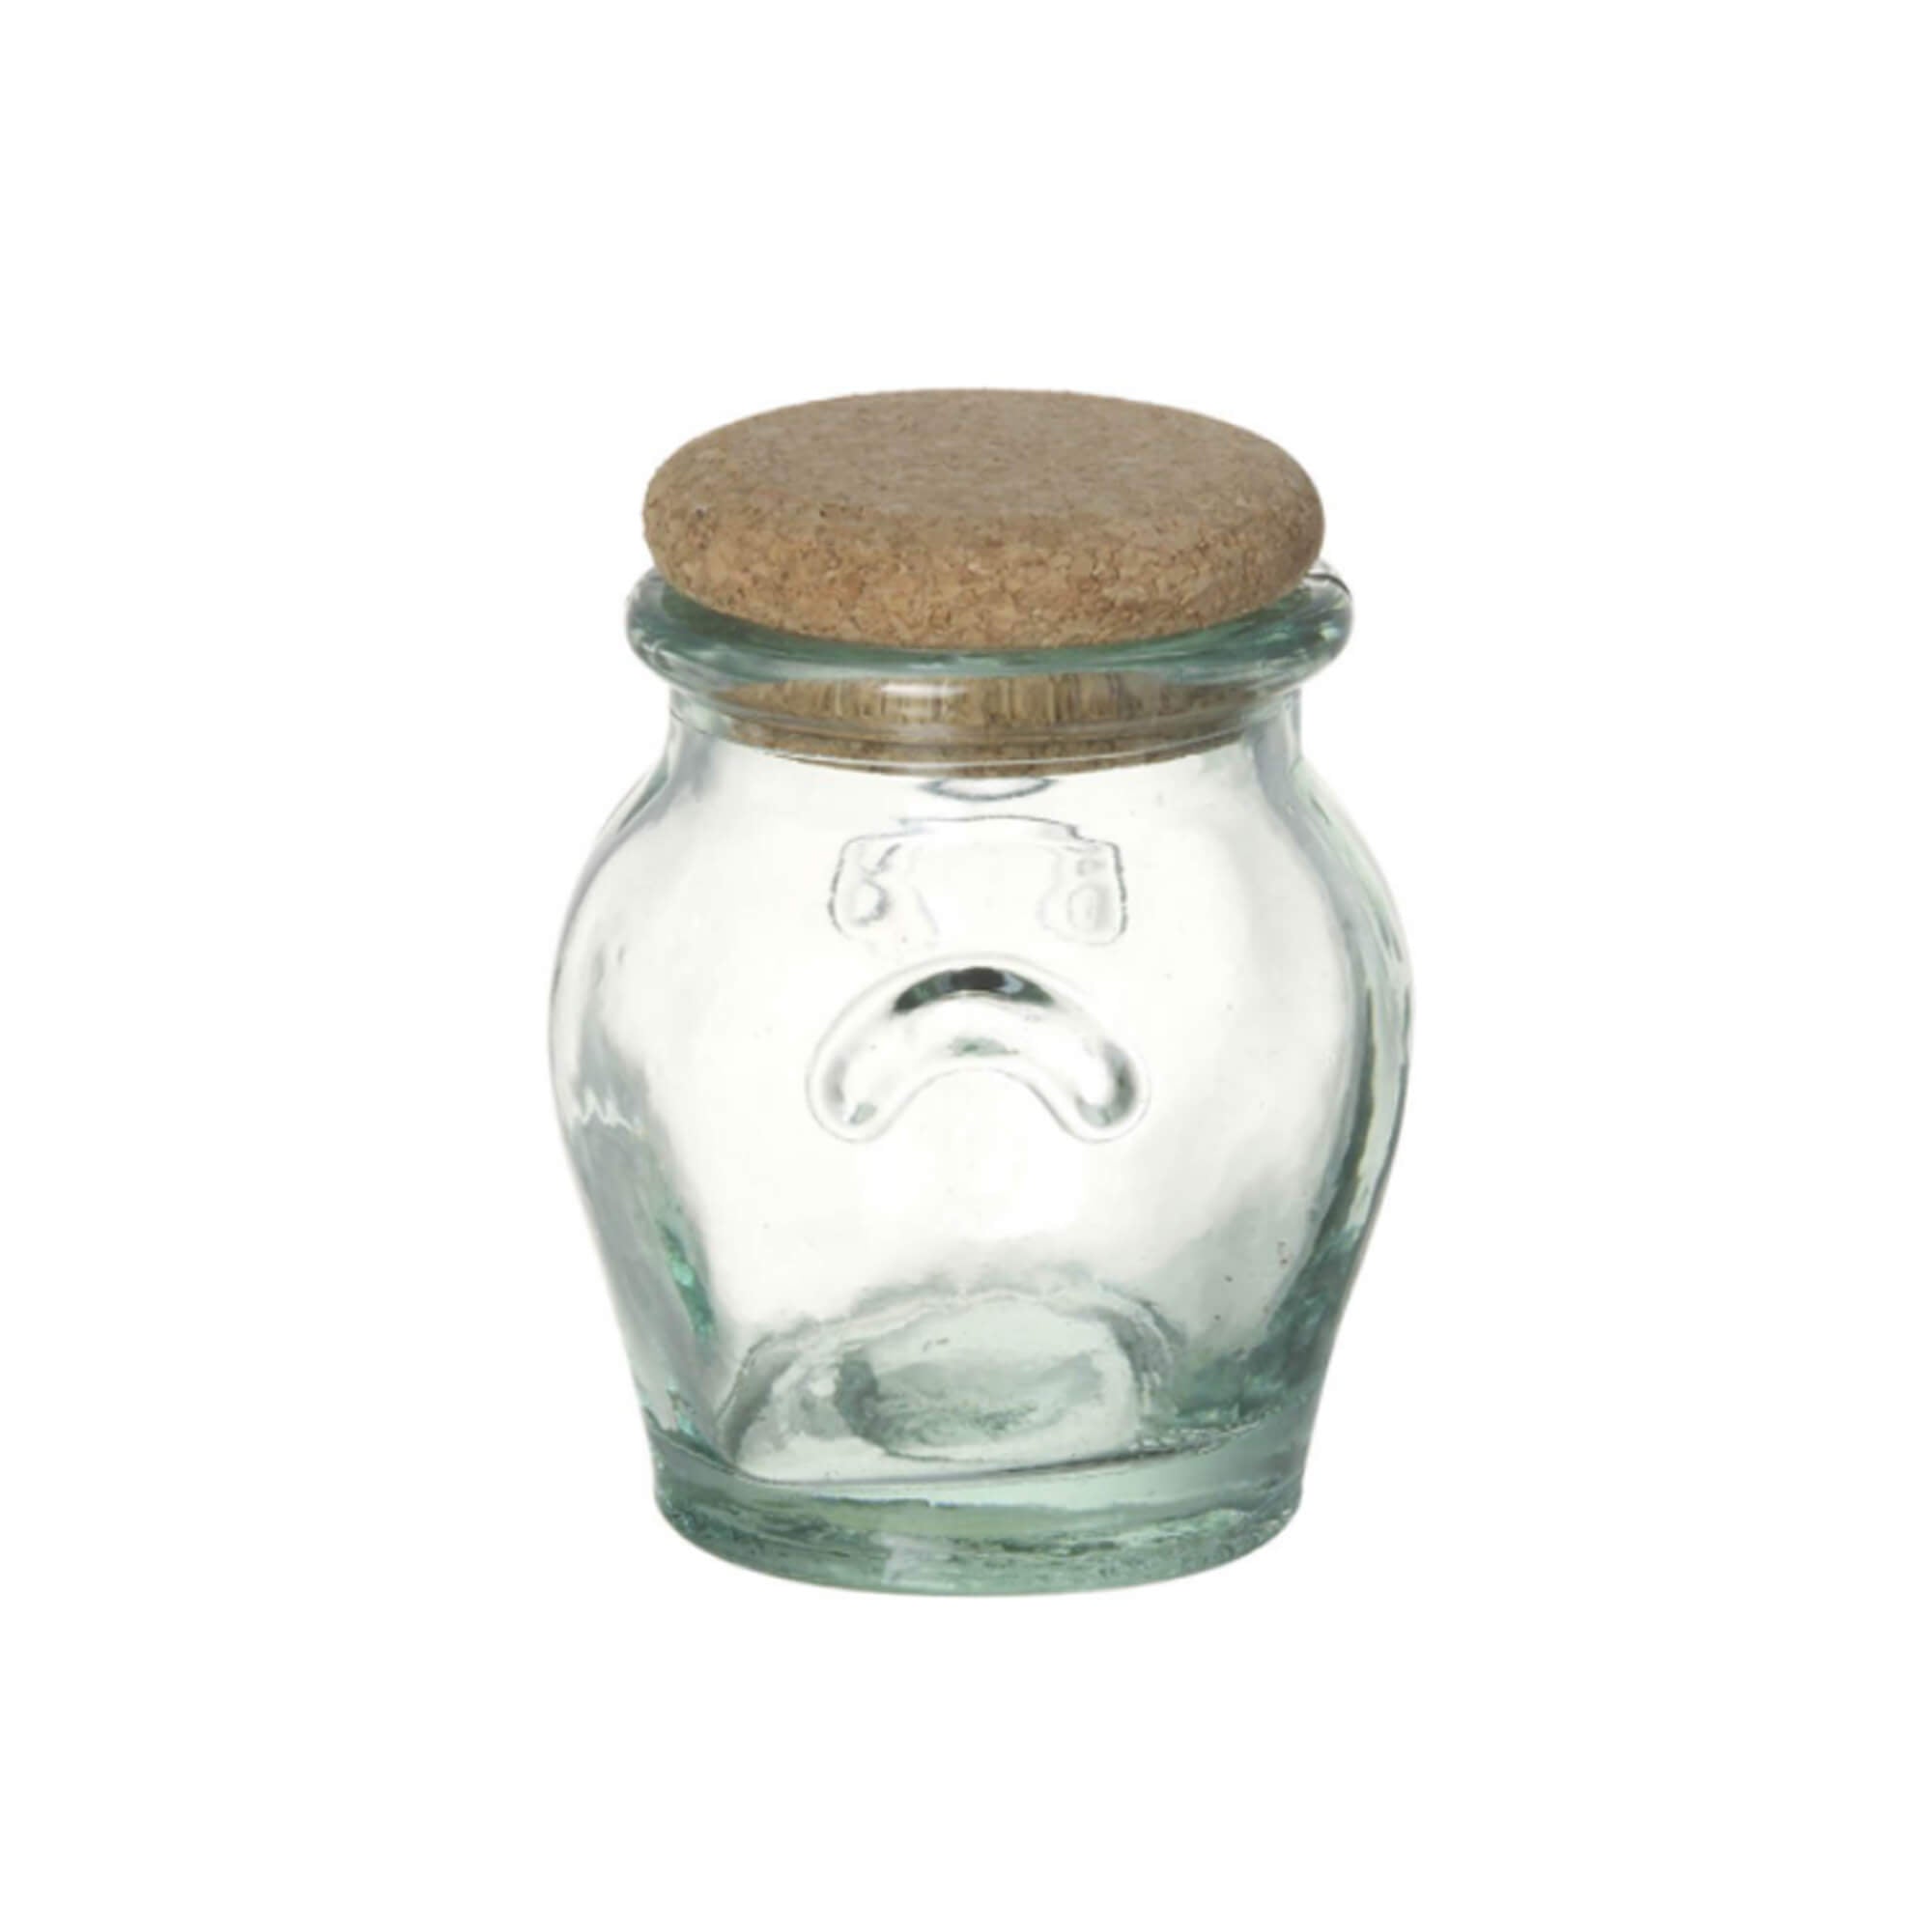 Cork Top Rounded Glass Jar